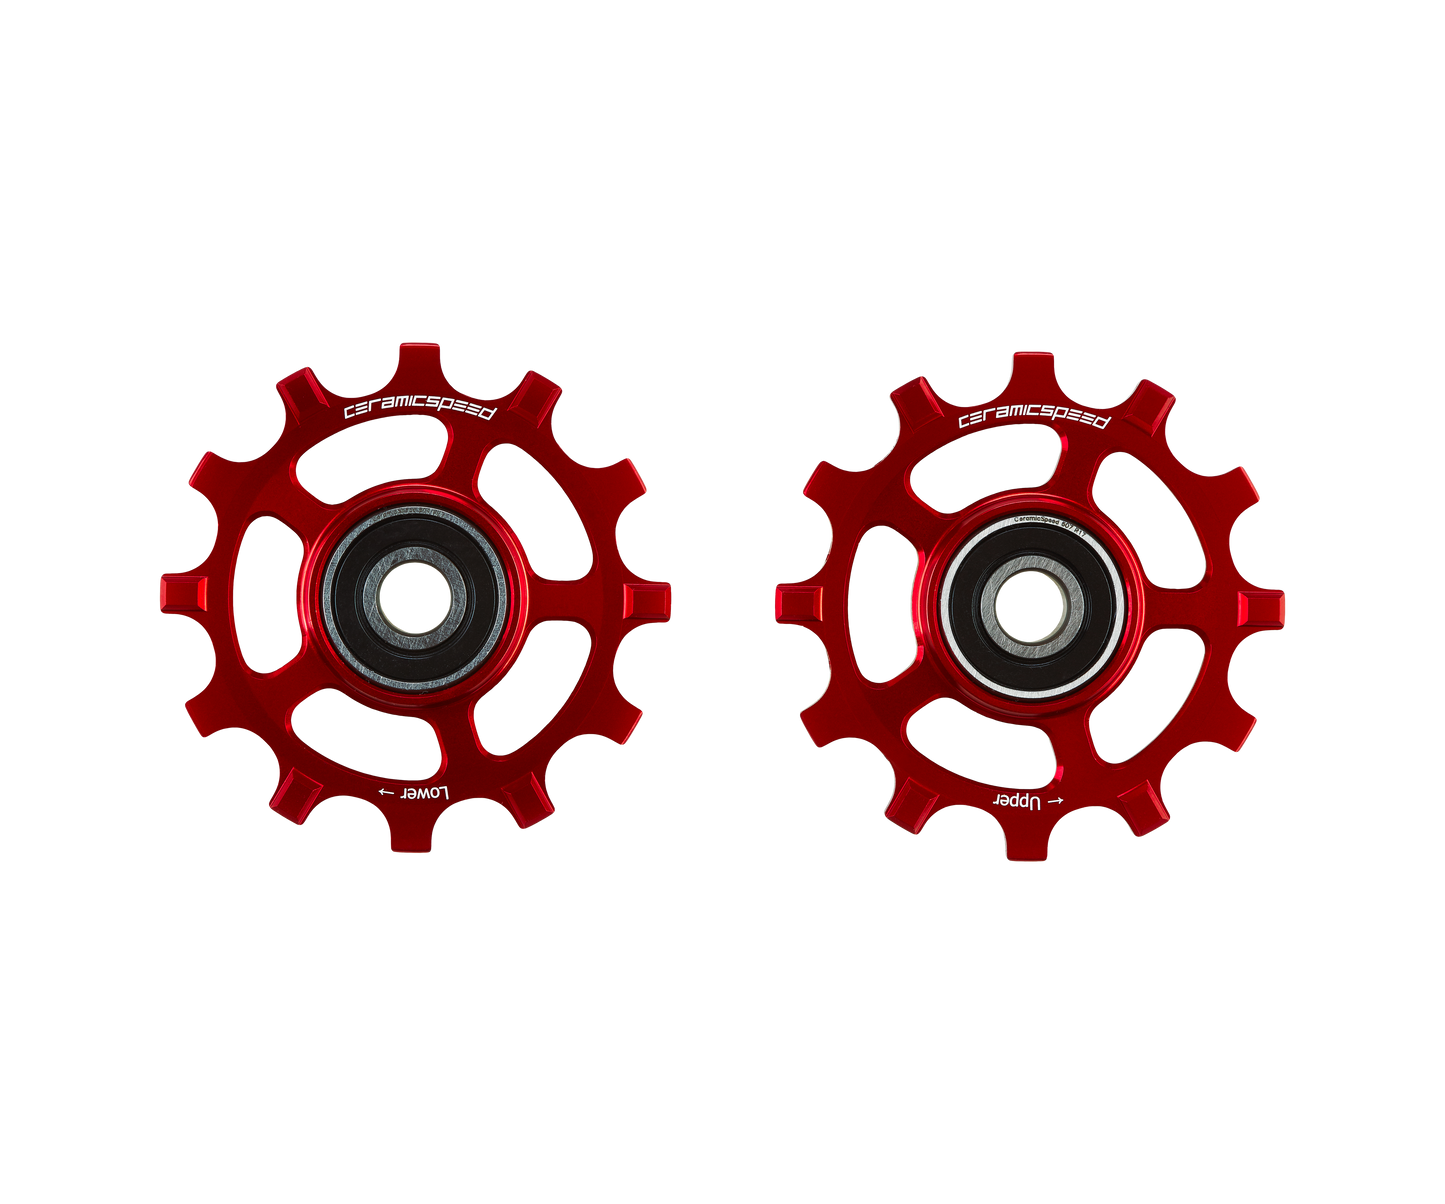 Alloy Pulley Wheels for Campagnolo, 12s NW